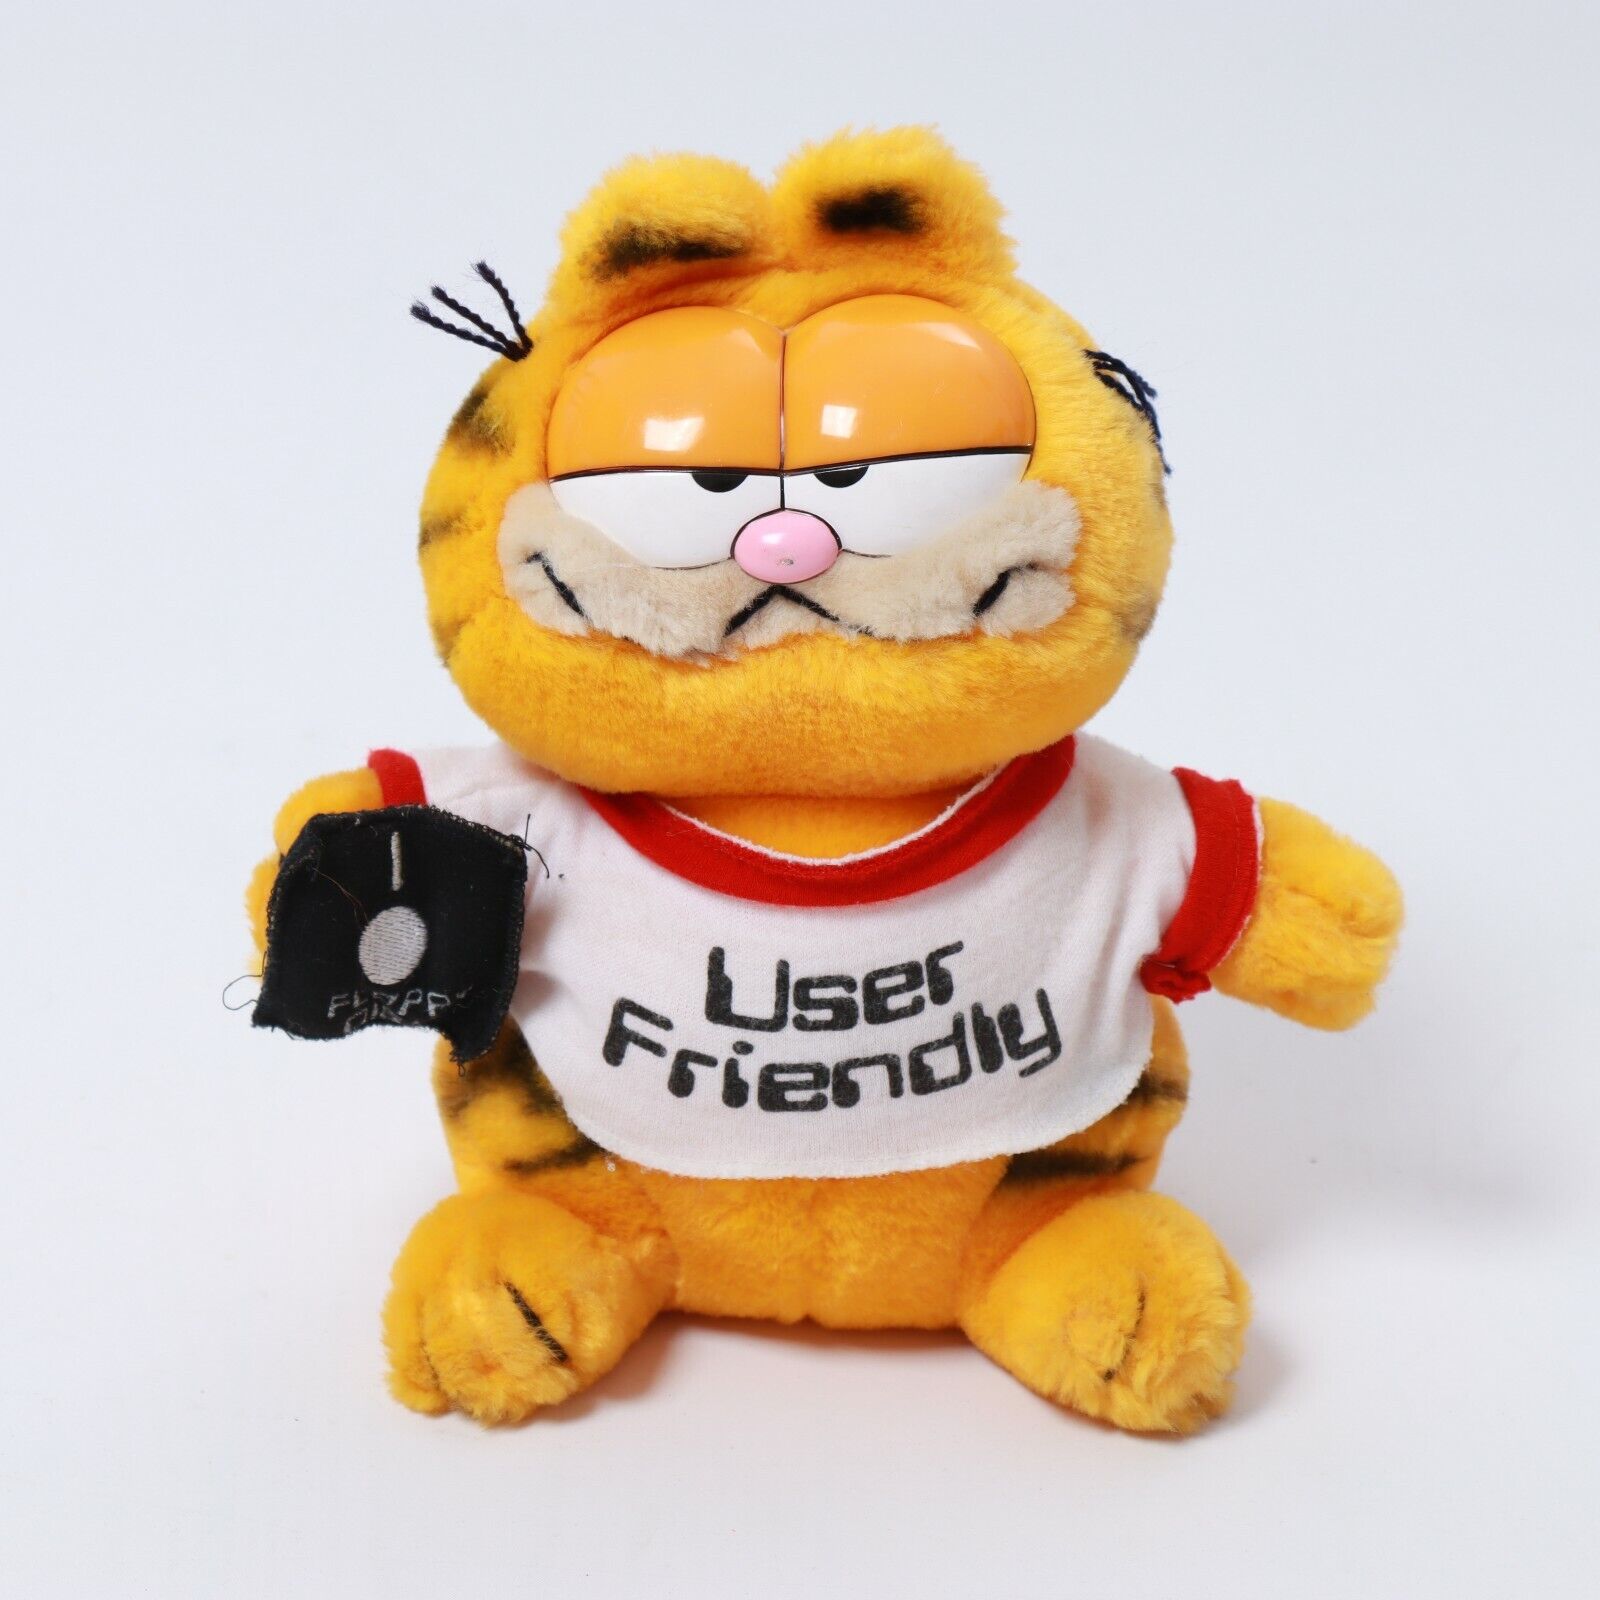 A plush of Garfield the cat holding a floppy disk and wearing a t-shirt with the text 'user friendly'.